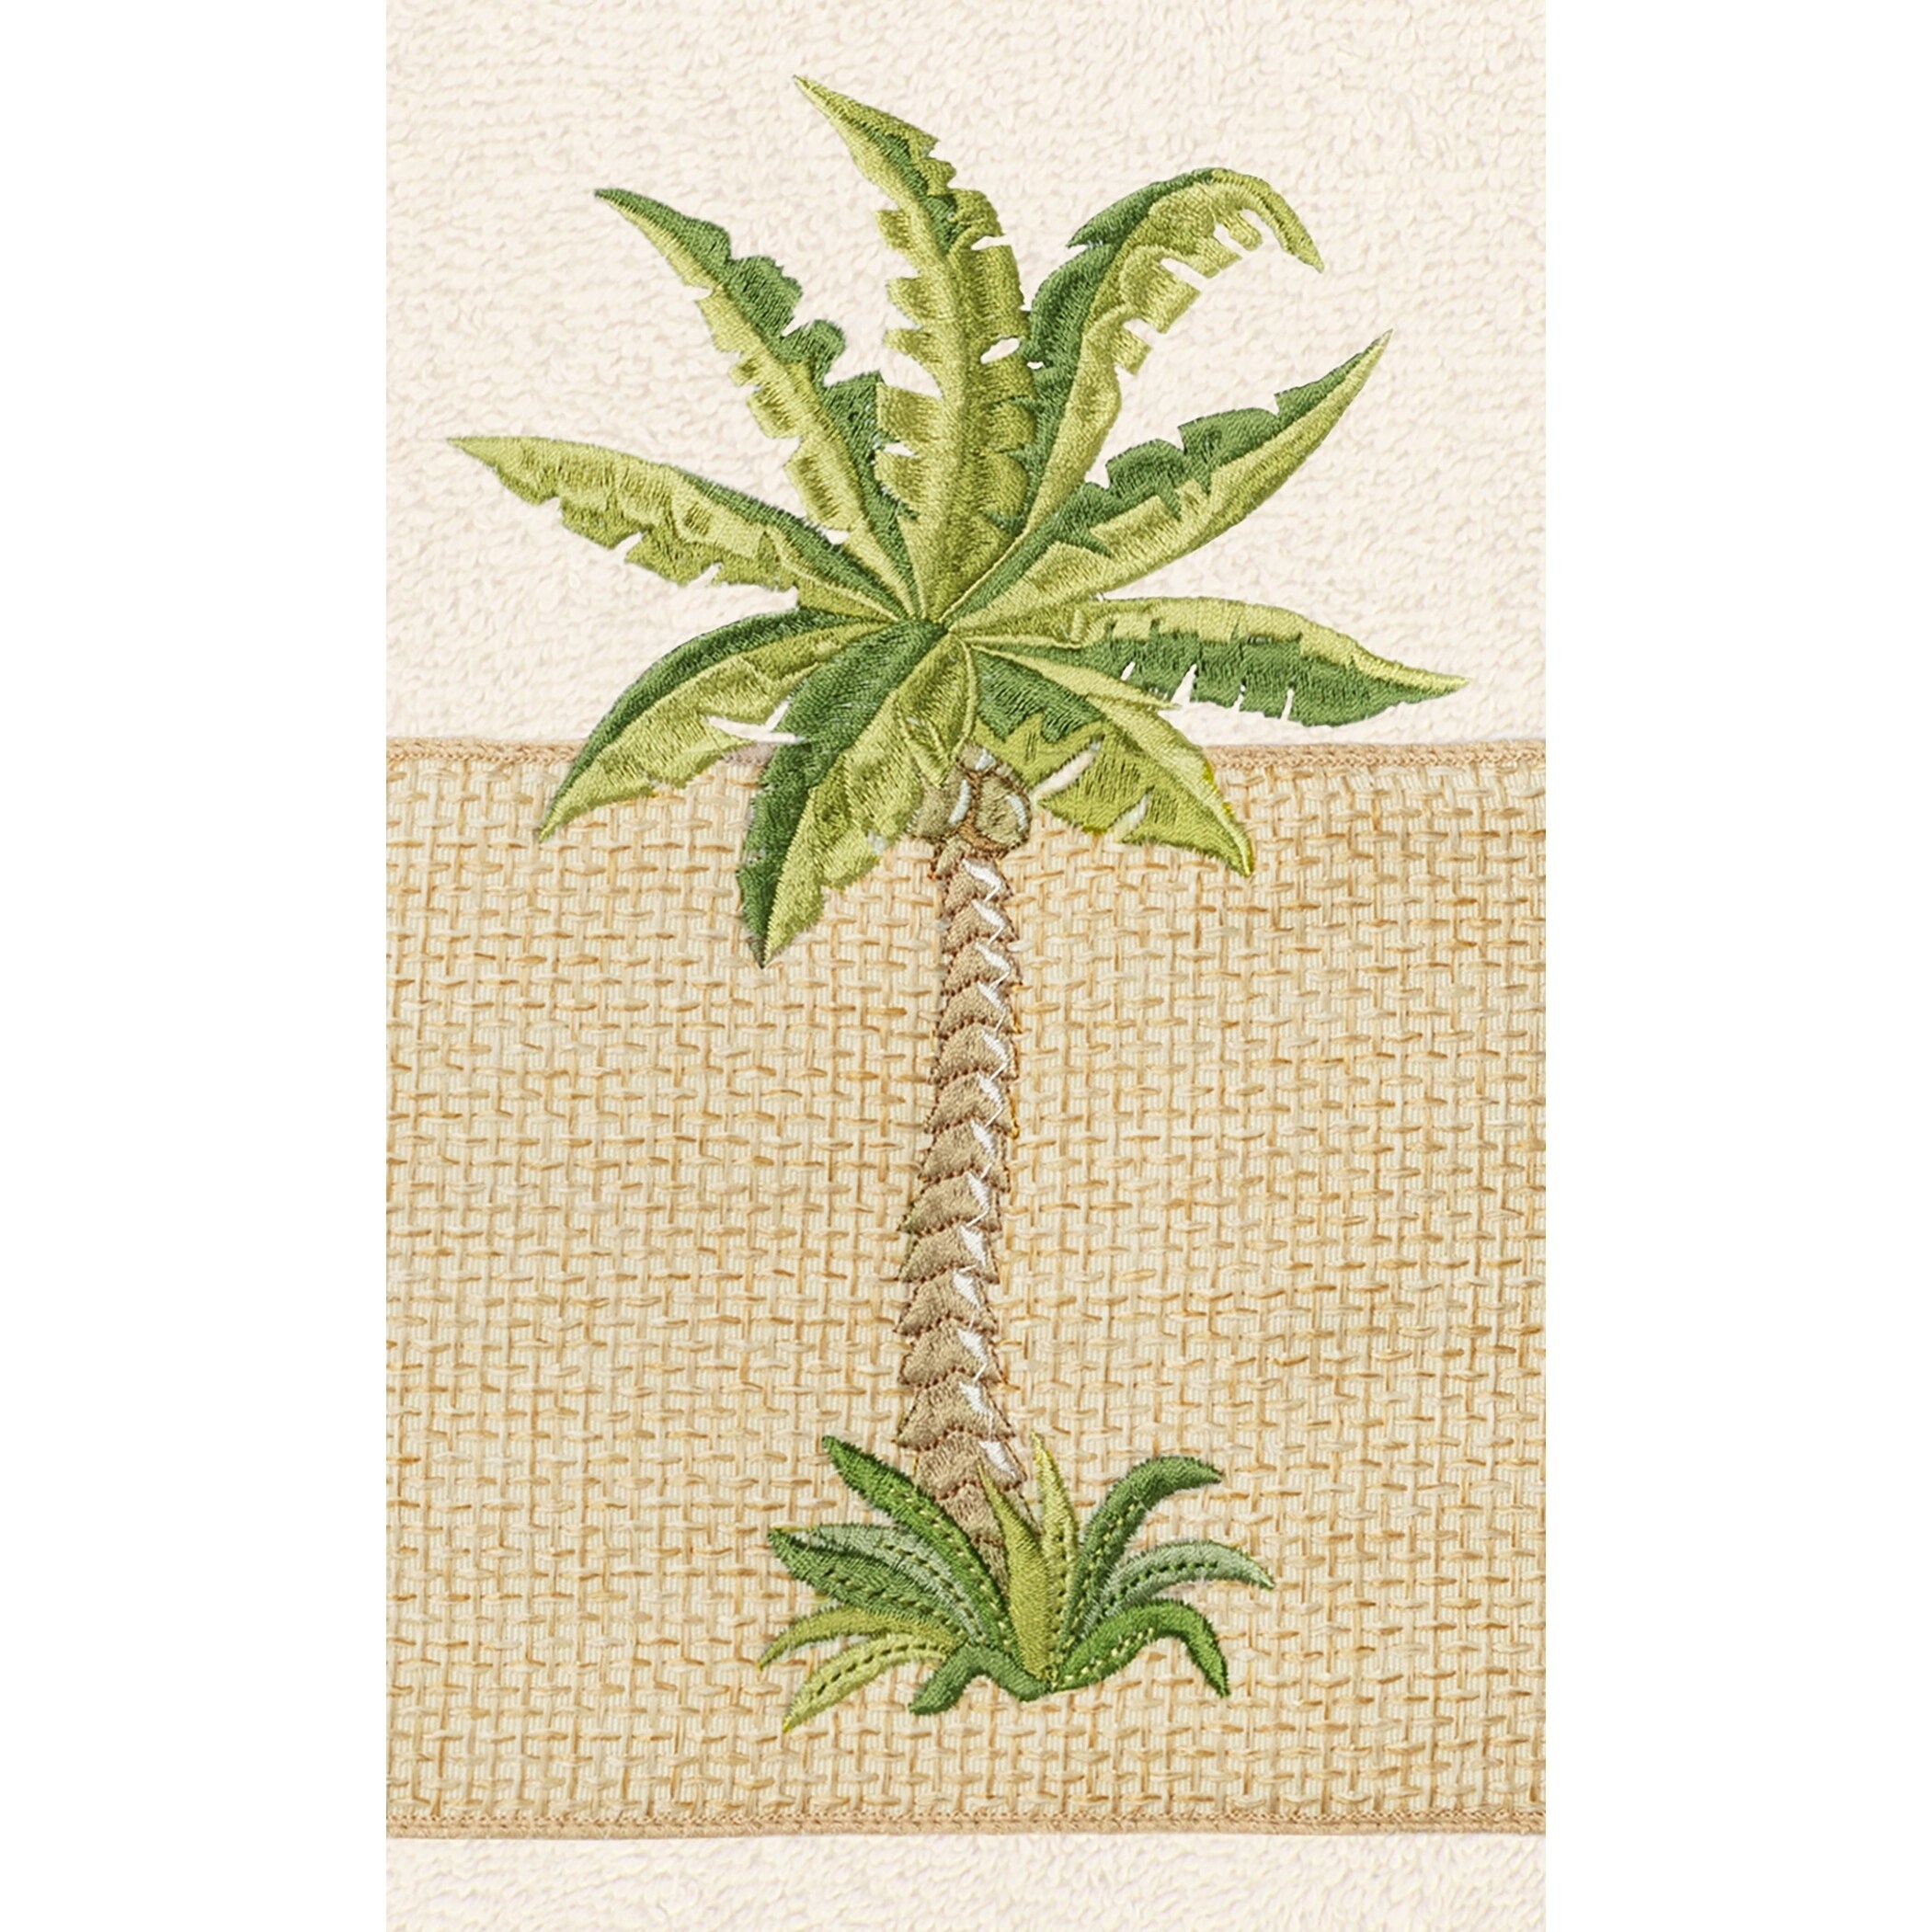 https://ak1.ostkcdn.com/images/products/21161563/Authentic-Hotel-and-Spa-Turkish-Cotton-Palm-Tree-Embroidered-Cream-Hand-Towels-Set-of-4-61274f0c-bd00-4196-bff6-d9f21f80a23b.jpg